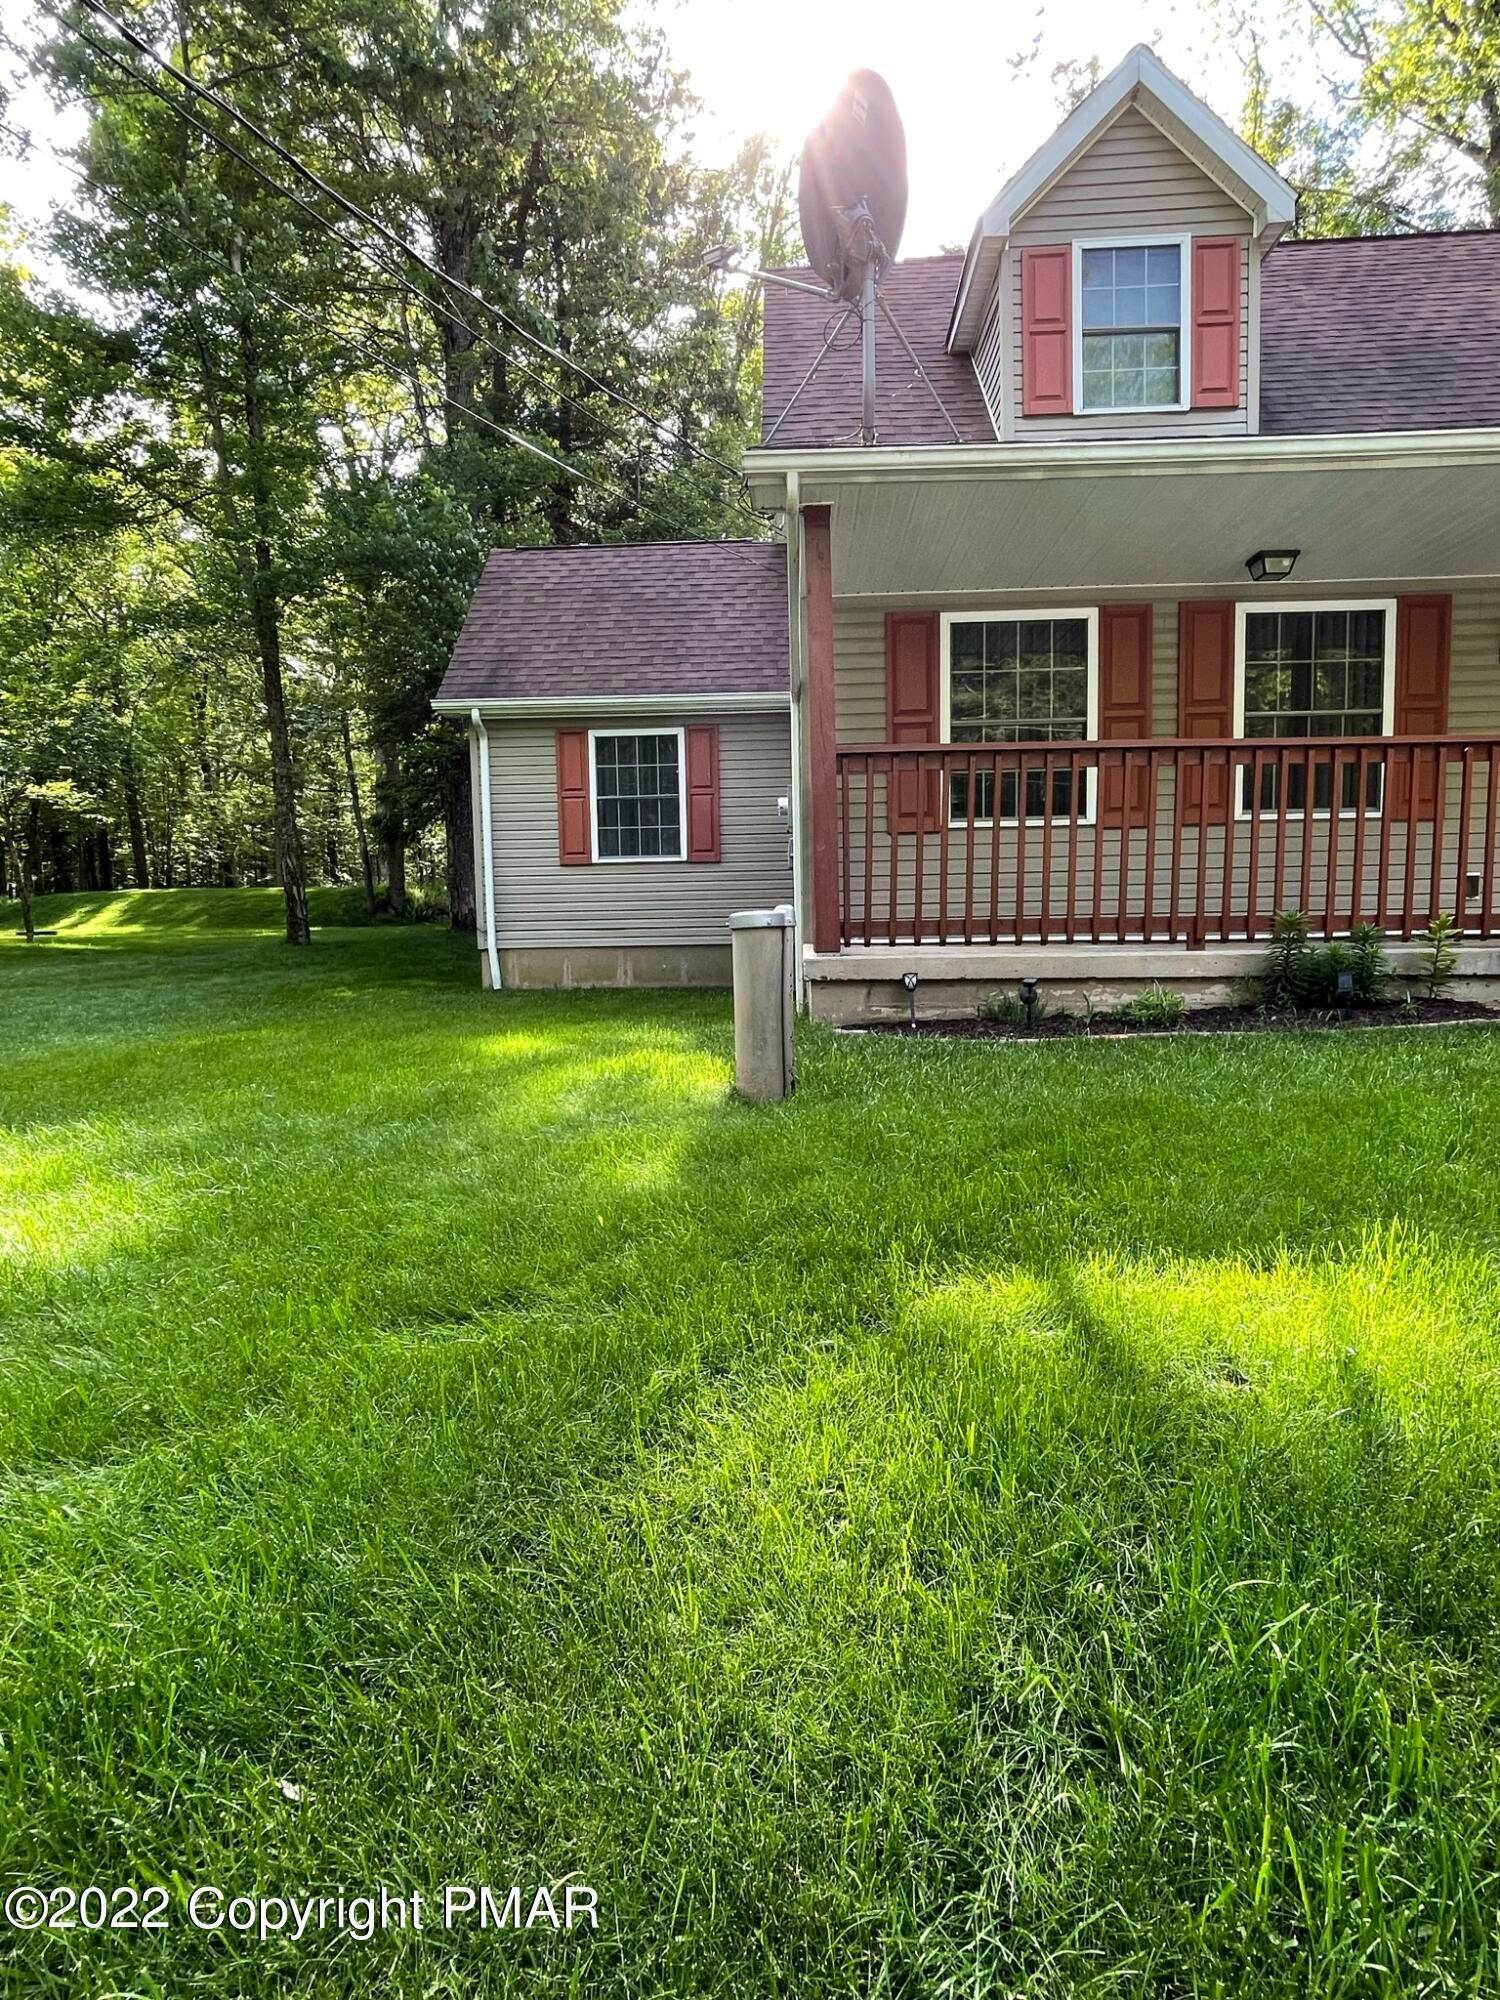 45. Single Family Homes for Sale at 155 Longfellow Circle Albrightsville, Pennsylvania 18210 United States